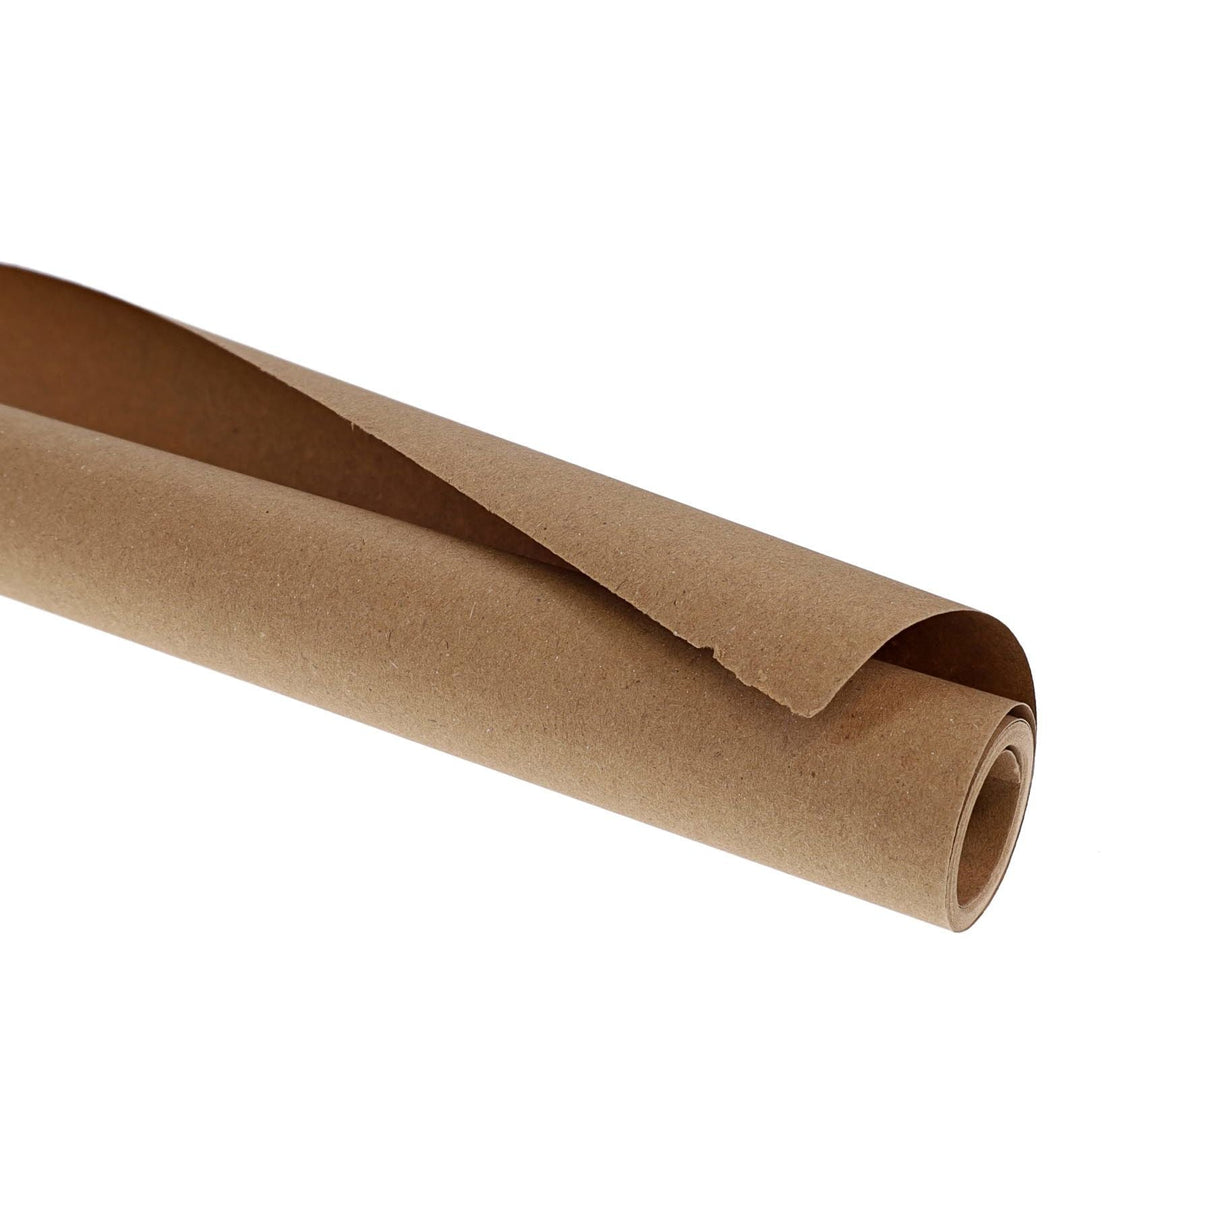 Concept Brown Wrapping Paper Roll - 2.5m x 70cm-Tissue Paper-Concept|StationeryShop.co.uk